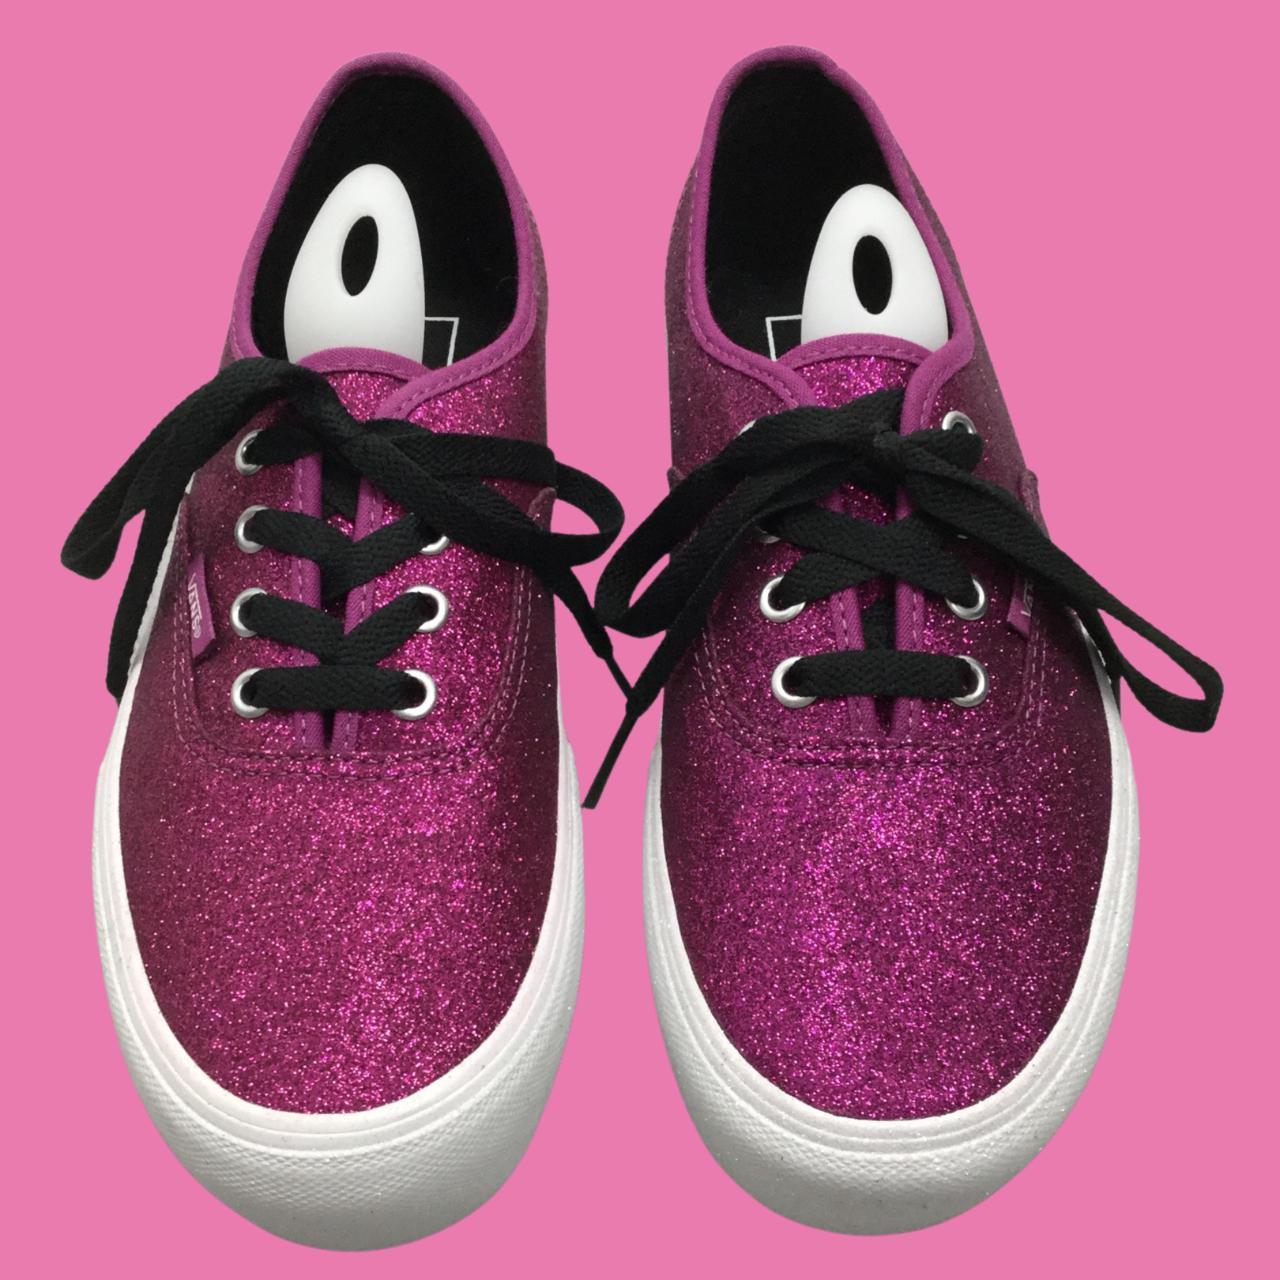 Product Image 2 - D8-08
VANS Trainers
-Glittered 
-Purple
-Lace up
-Ankle rise

Condition-